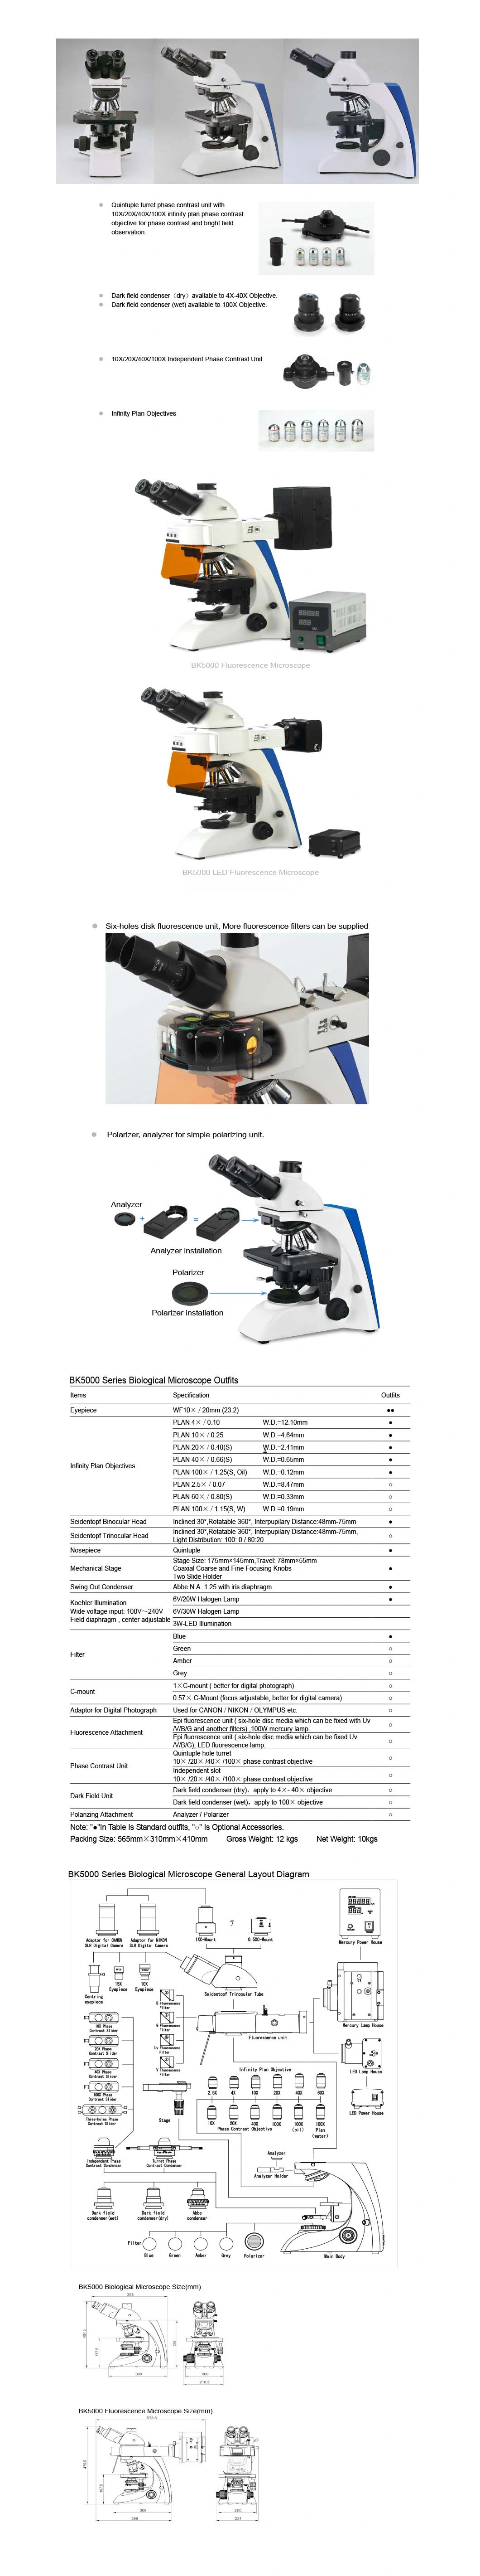 Upright Fluorescence Microscope Biological Microscope for Medical Instrument